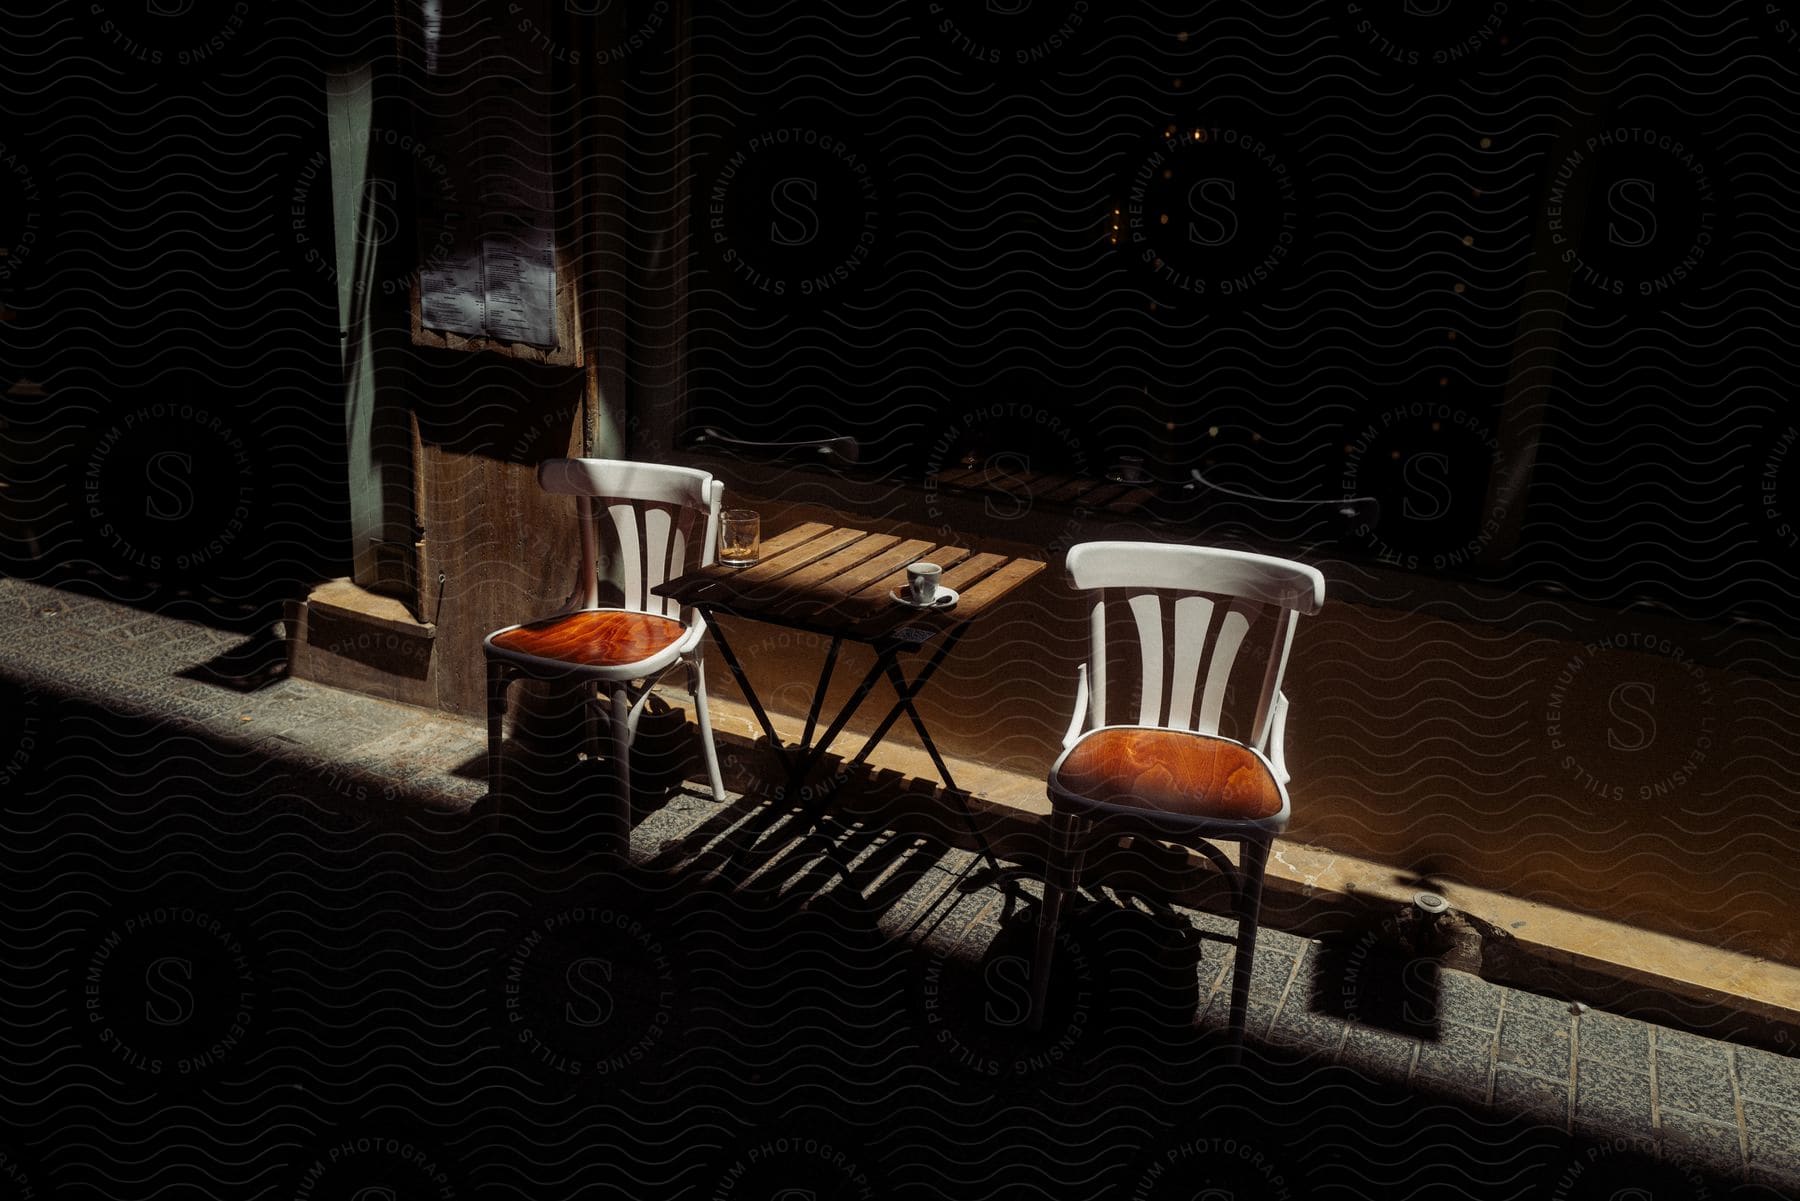 Coffee table two chairs and a coffee mug on the table with a dark evening outside a shop